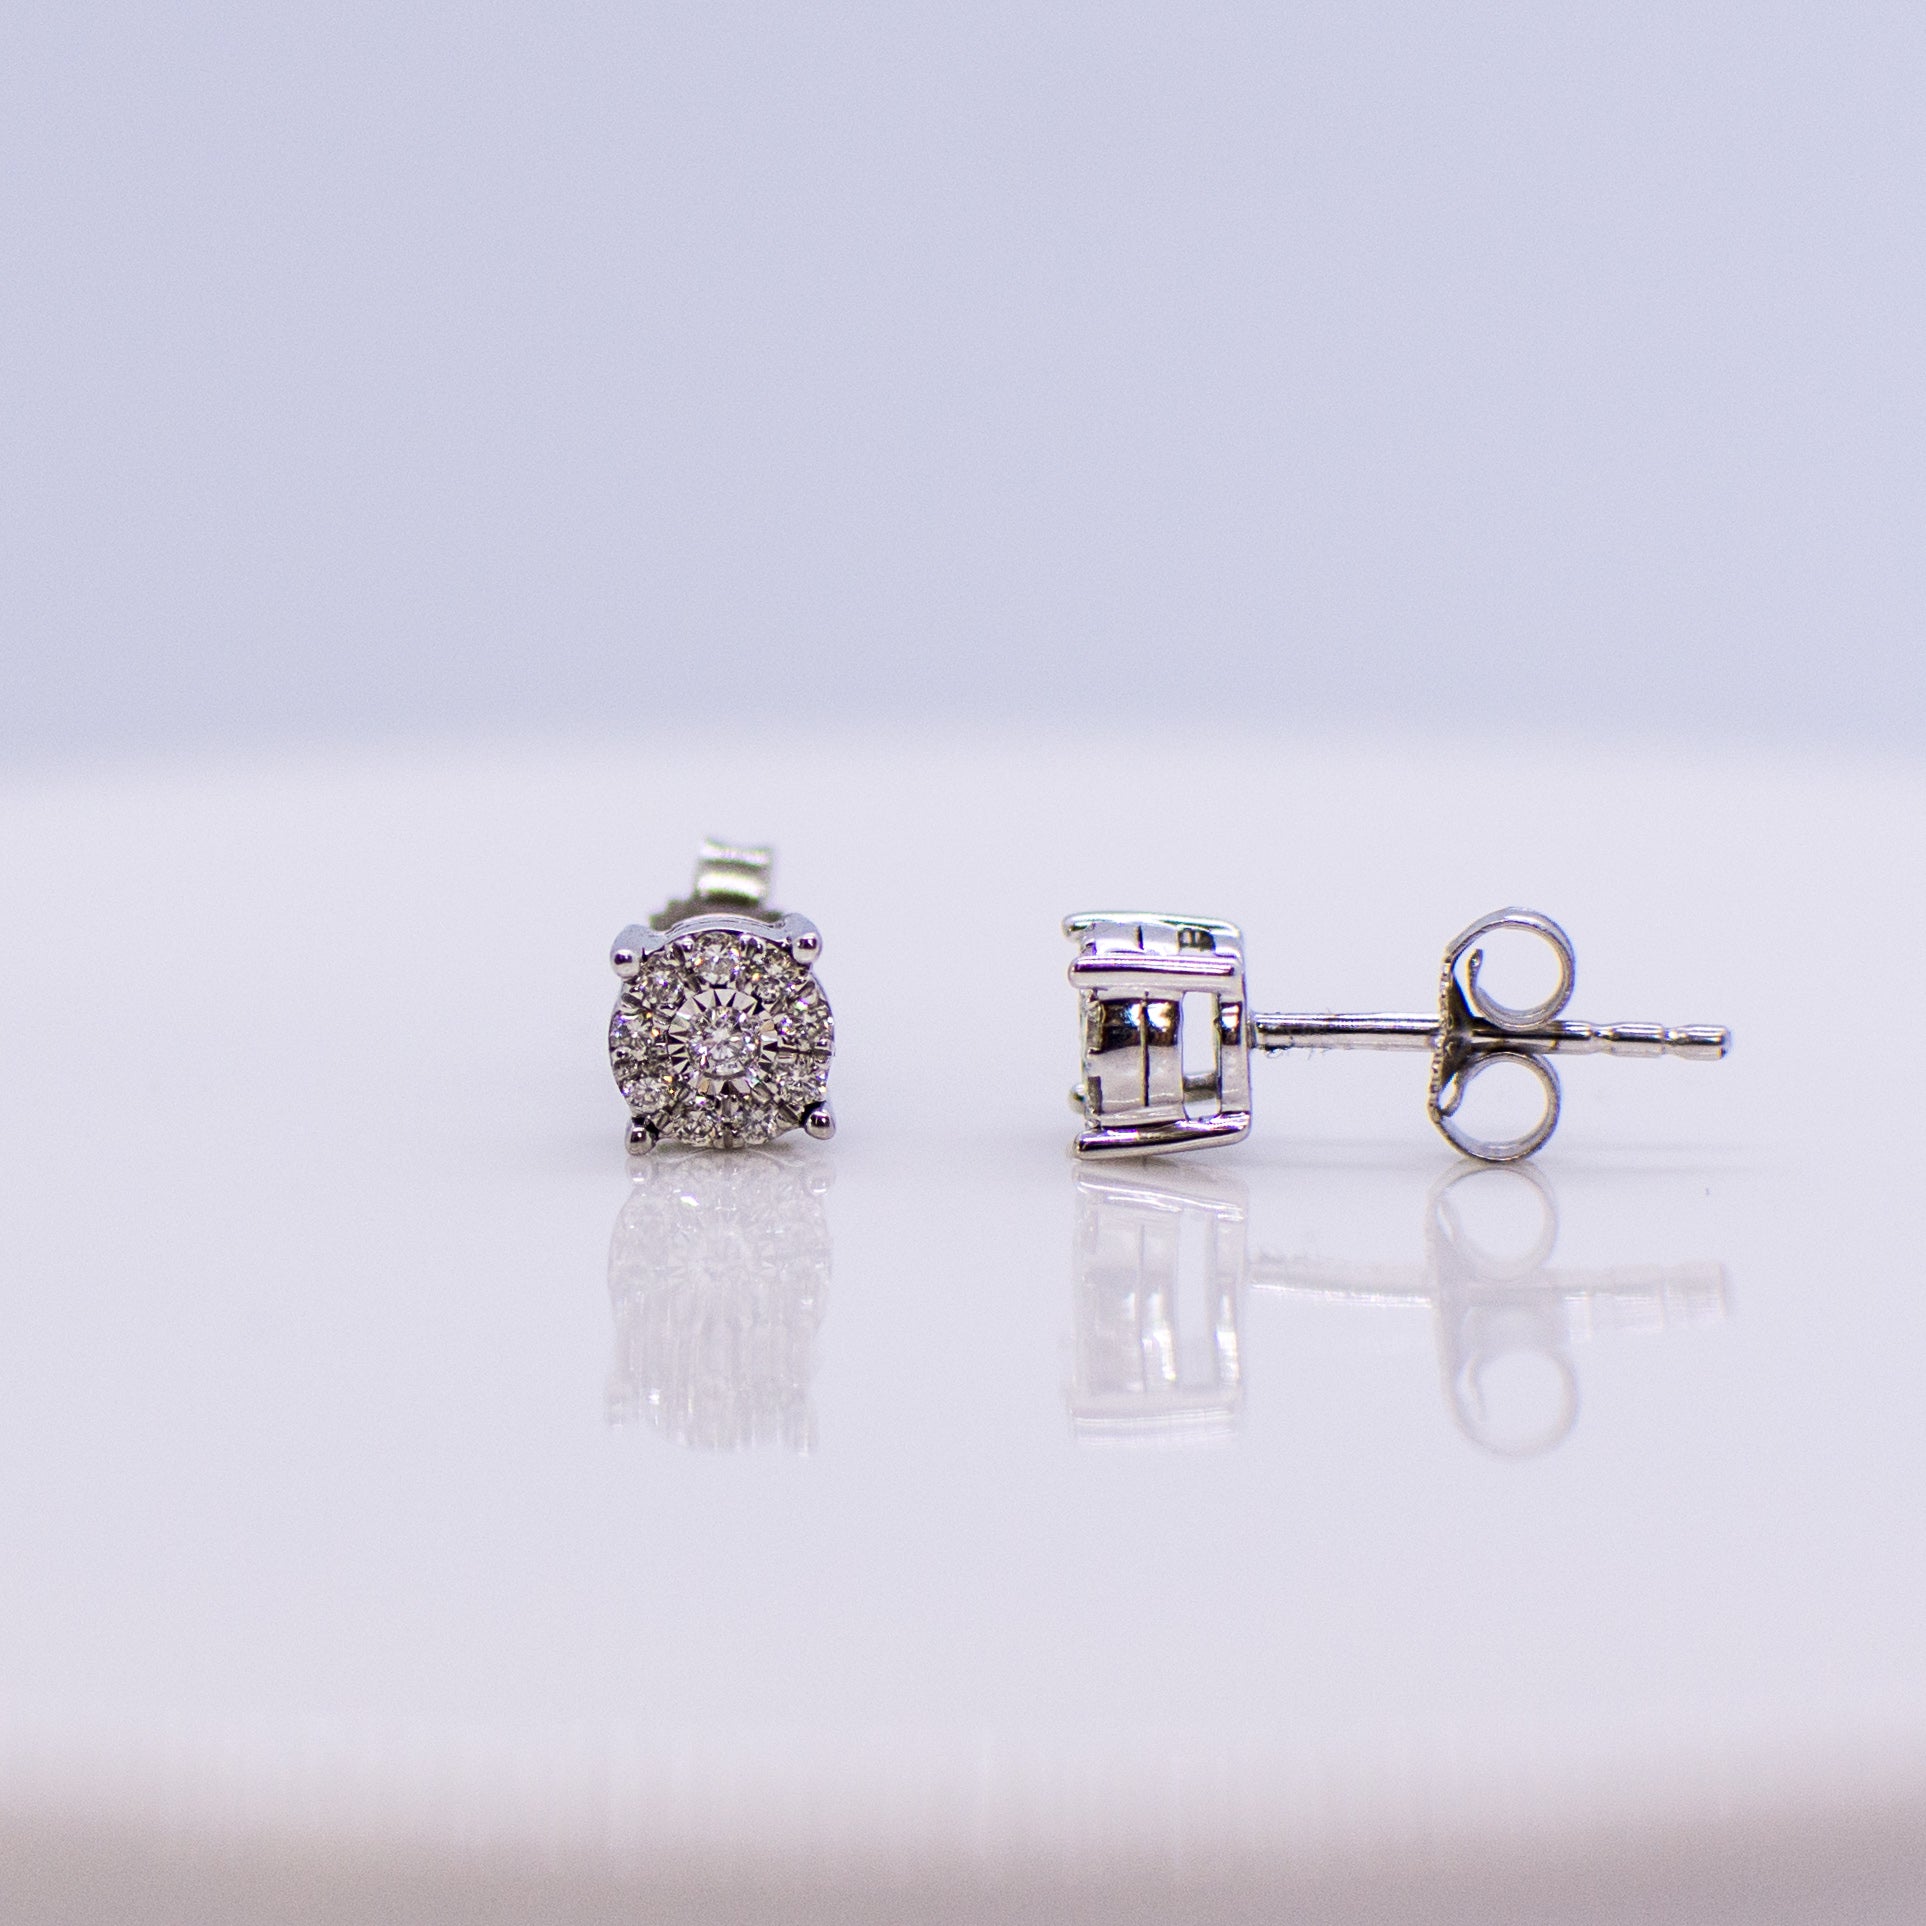 5mm wide diamond set stud earrings. 0.15ct of round brilliant cut diamonds.  Illusion setting.  9ct white gold.   Butterfly backs.